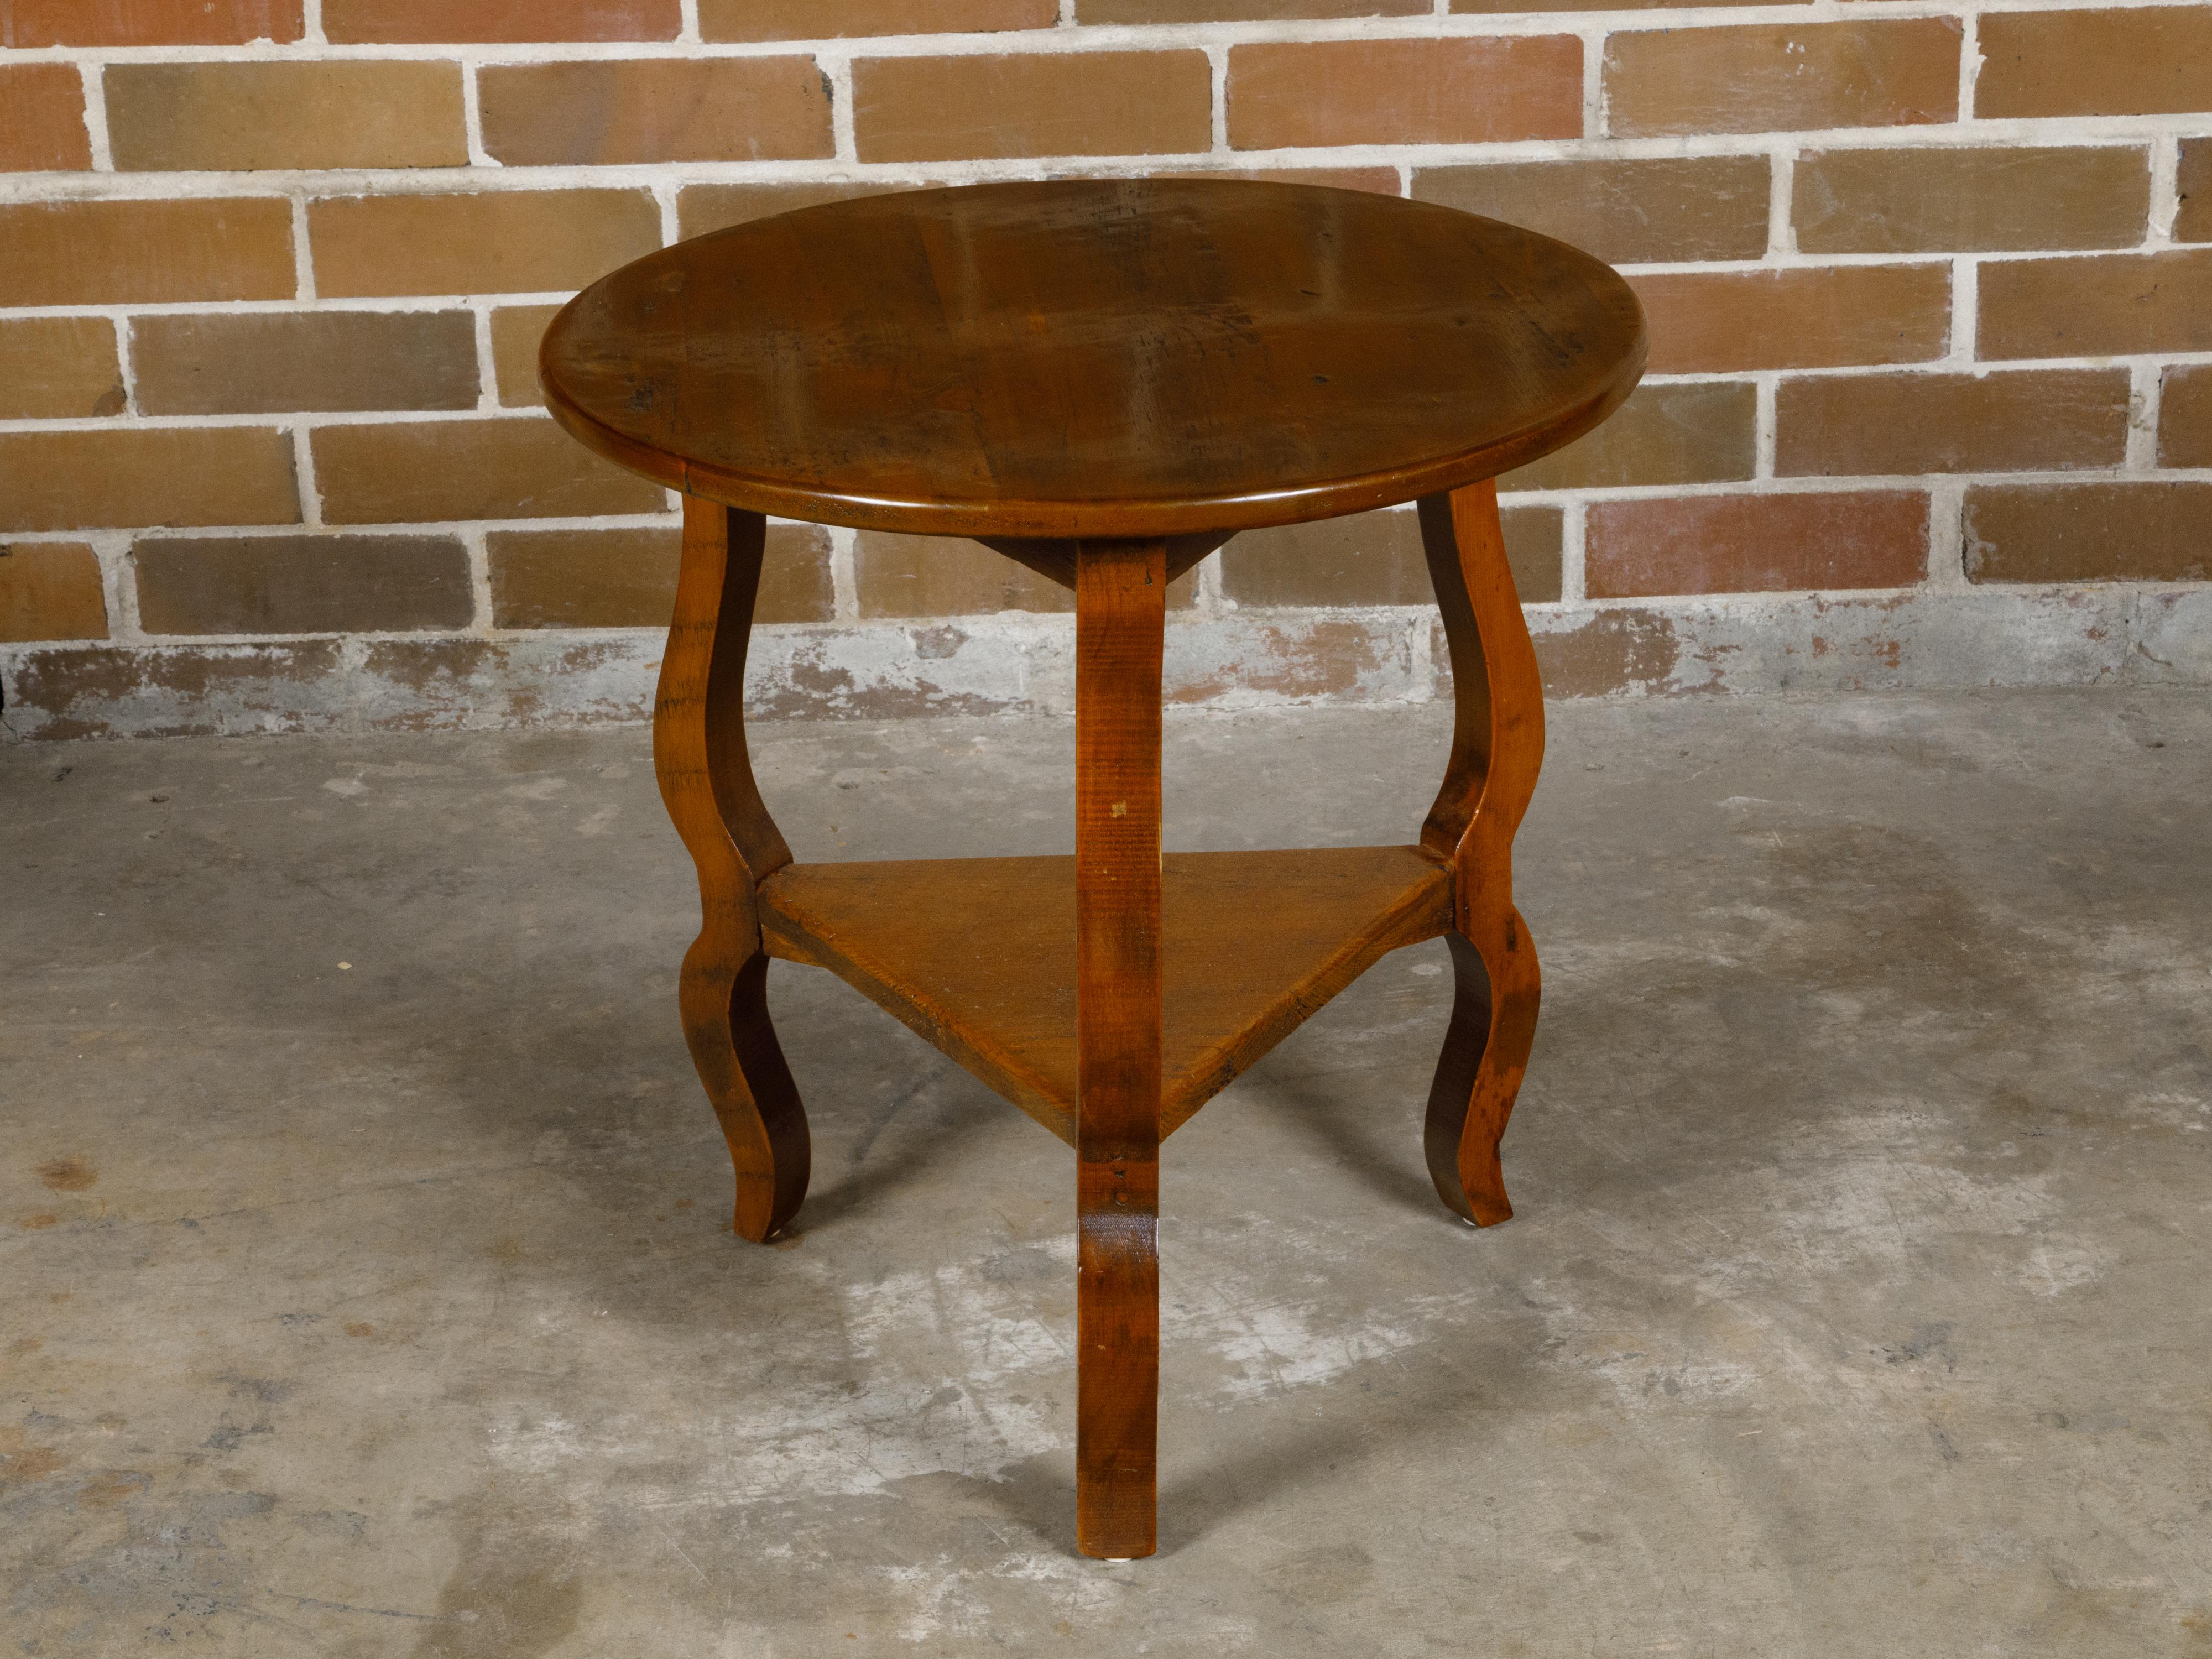 English Pine Side Table with Circular Top, Curving Legs and Triangular Shelf For Sale 7